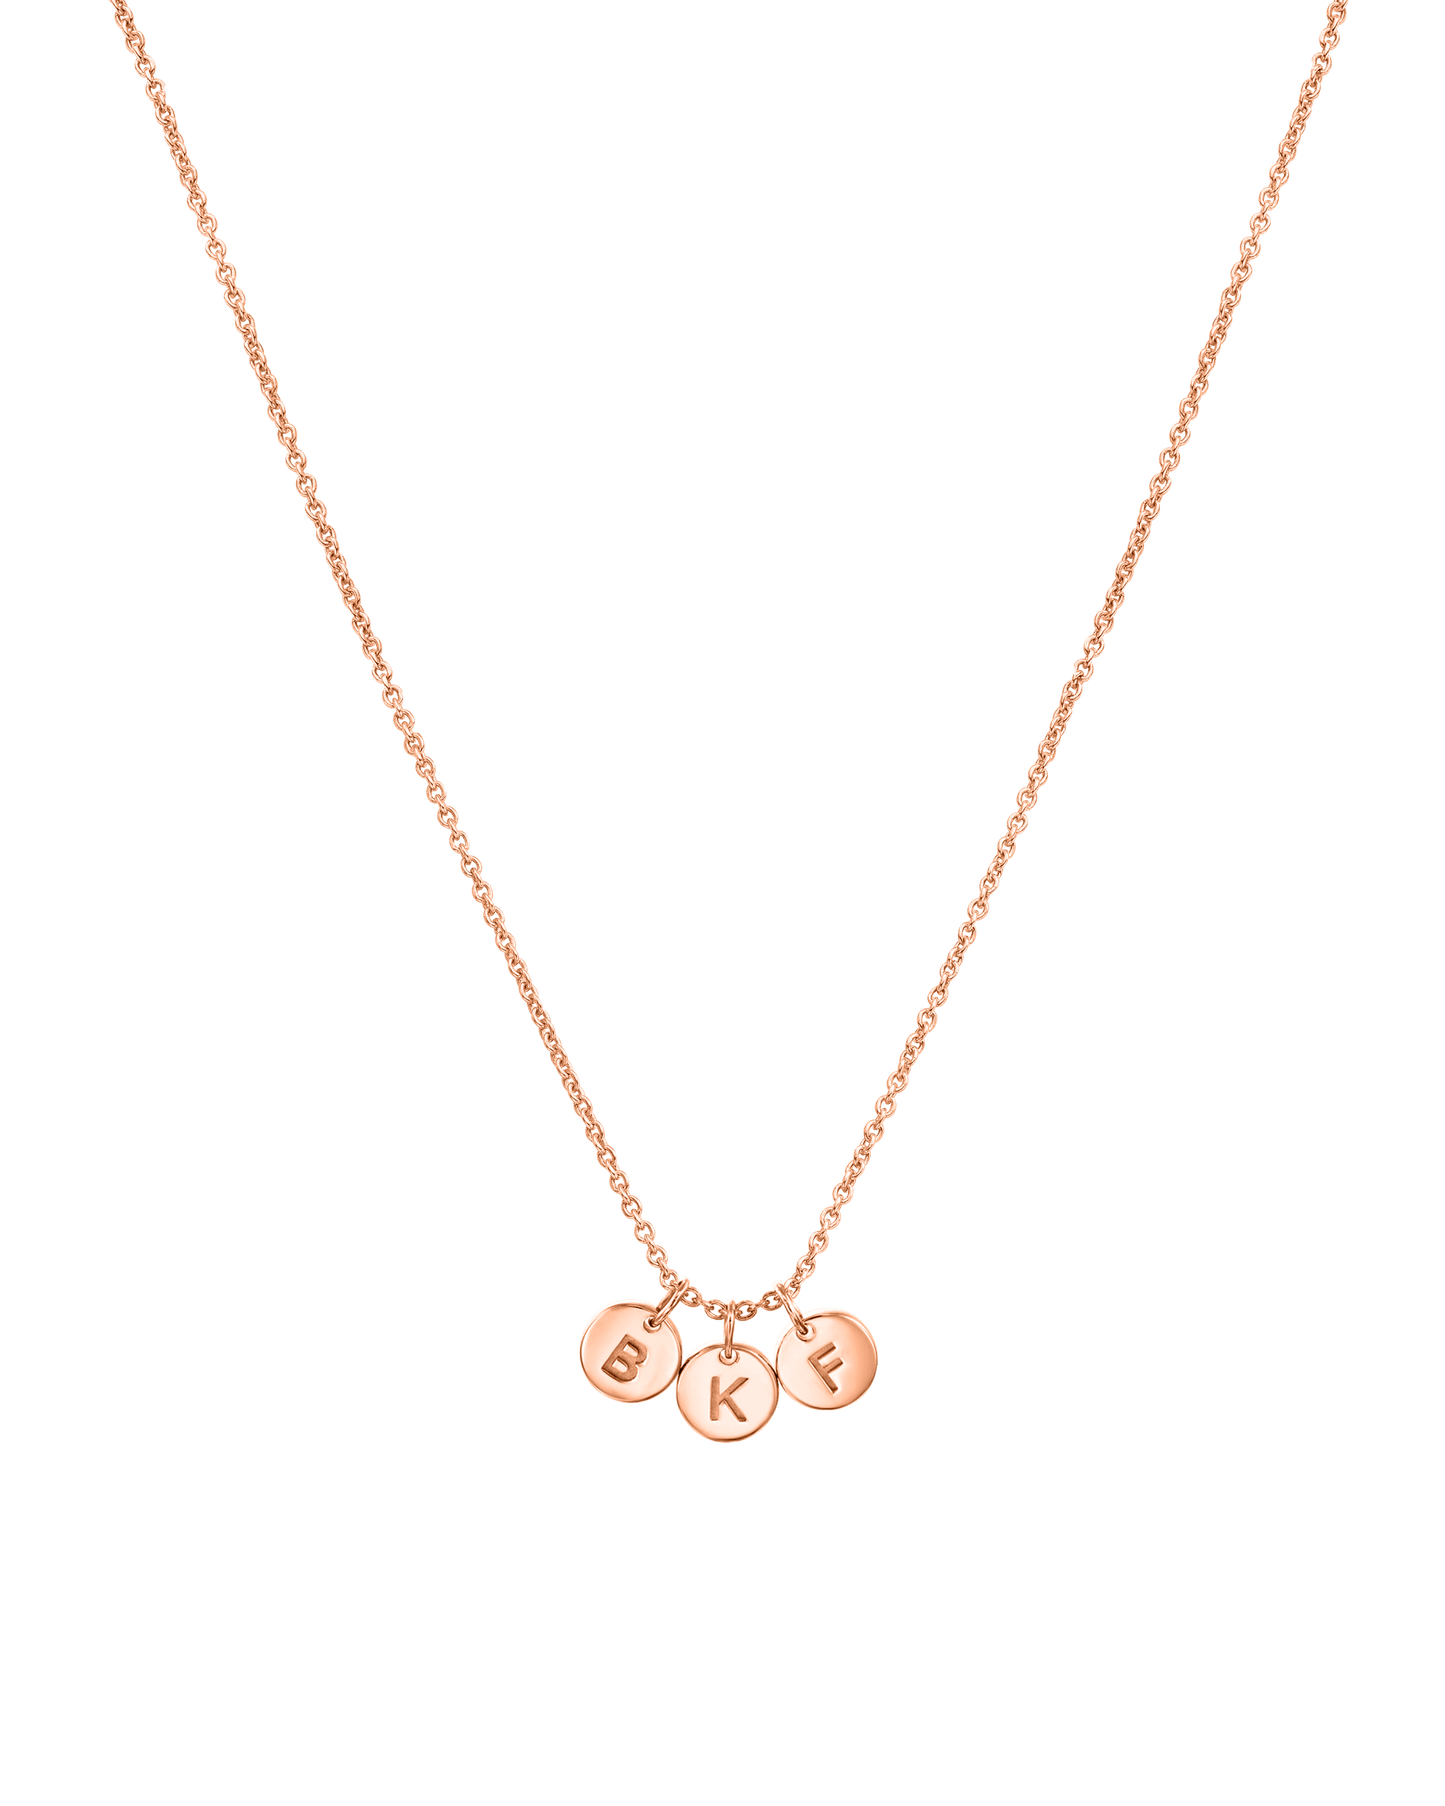 Tiny Initial Disc Necklace - 18K Rose Vermeil Necklaces magal-dev 1 Initial 16" 